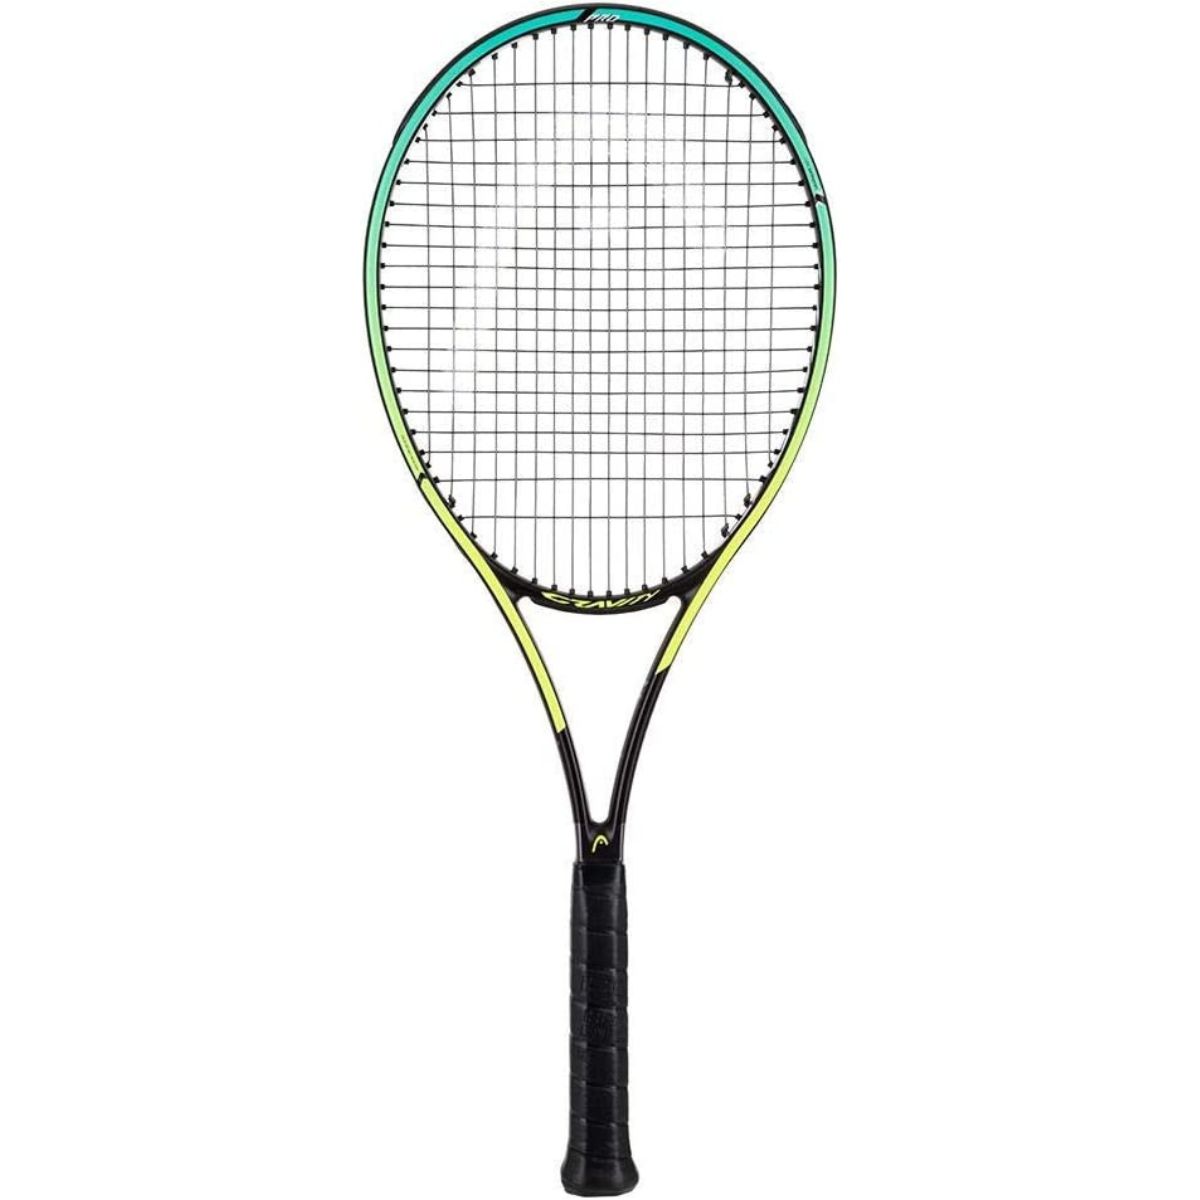 The Best Tennis Rackets for Control Options: Head Gravity Pro 2021